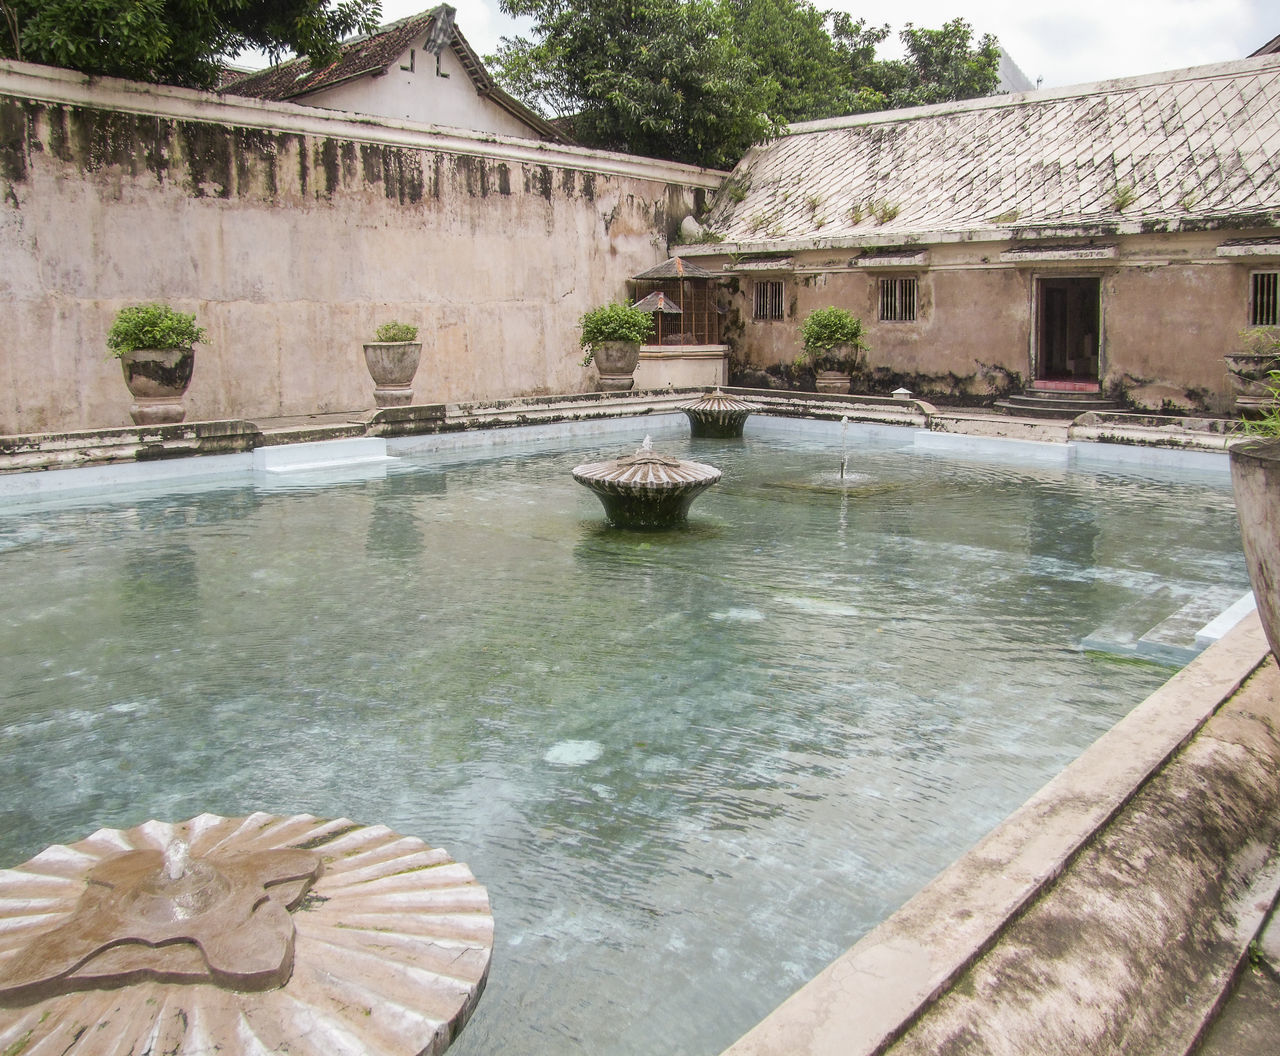 VIEW OF A FOUNTAIN IN A LAKE